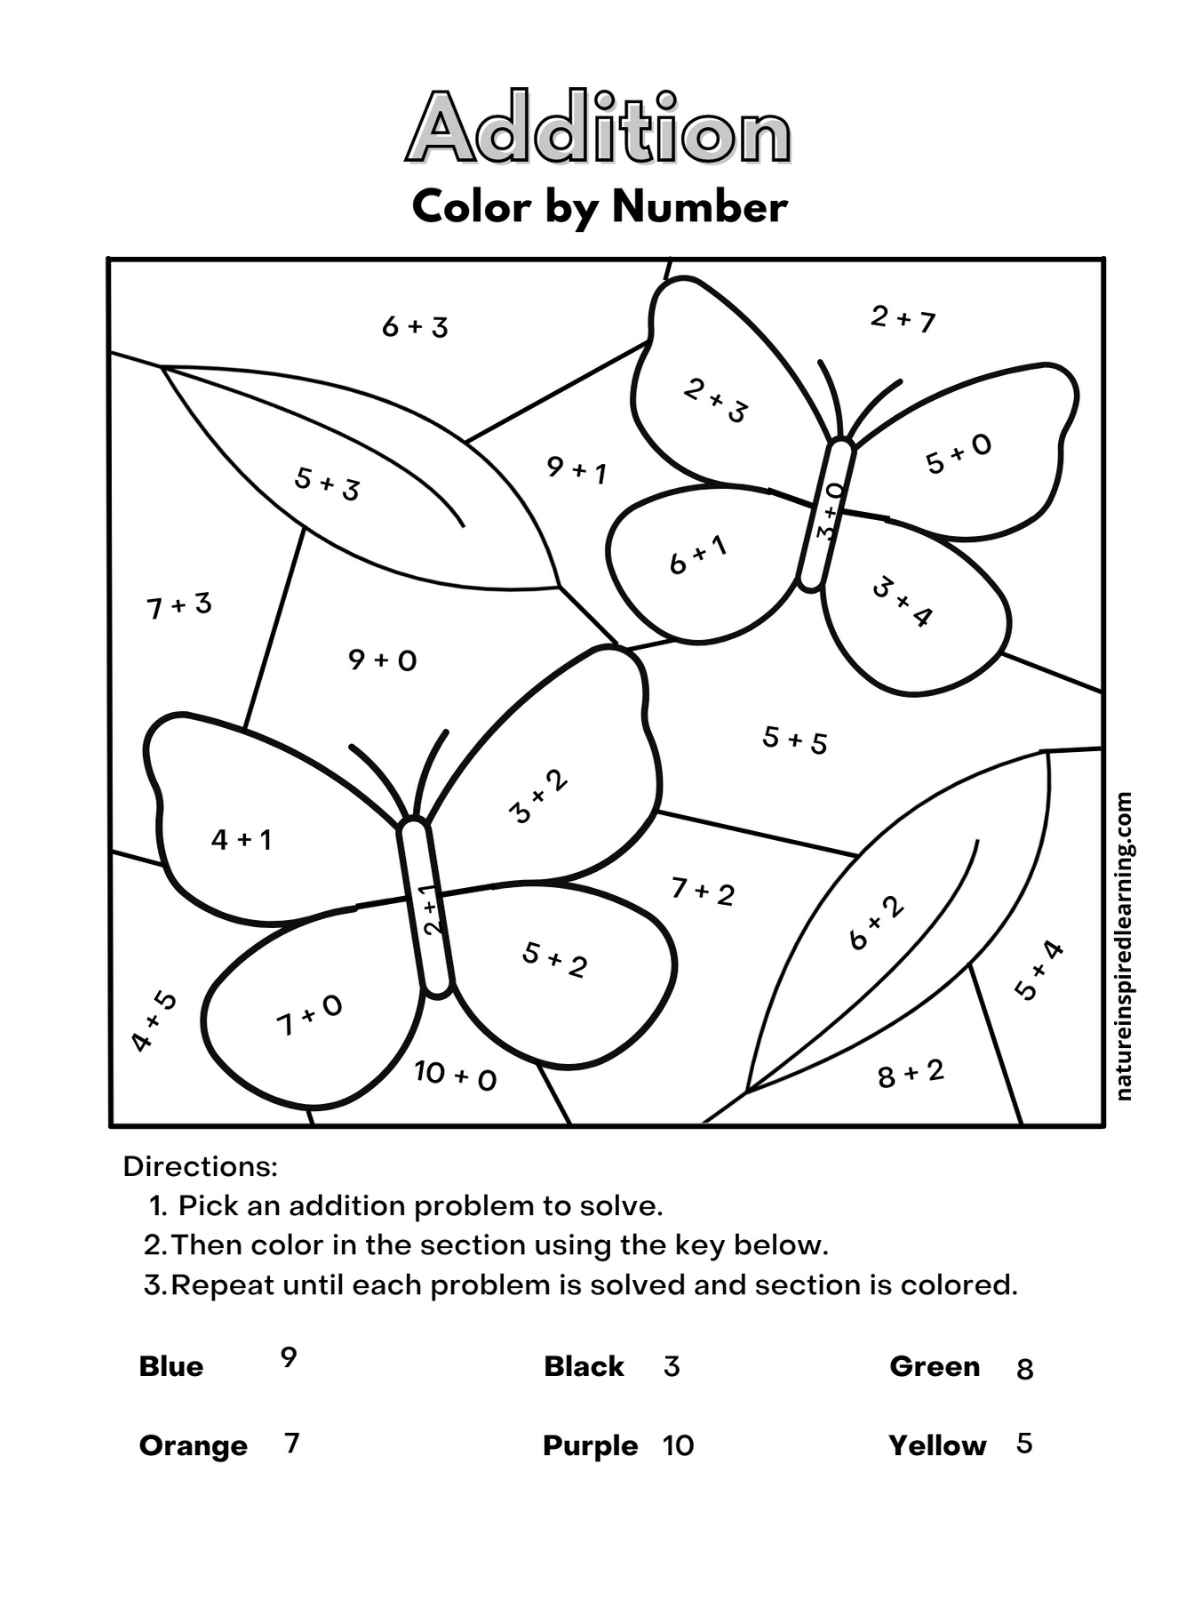 Worksheet with color by number single digit addition with butterflies and leaves.